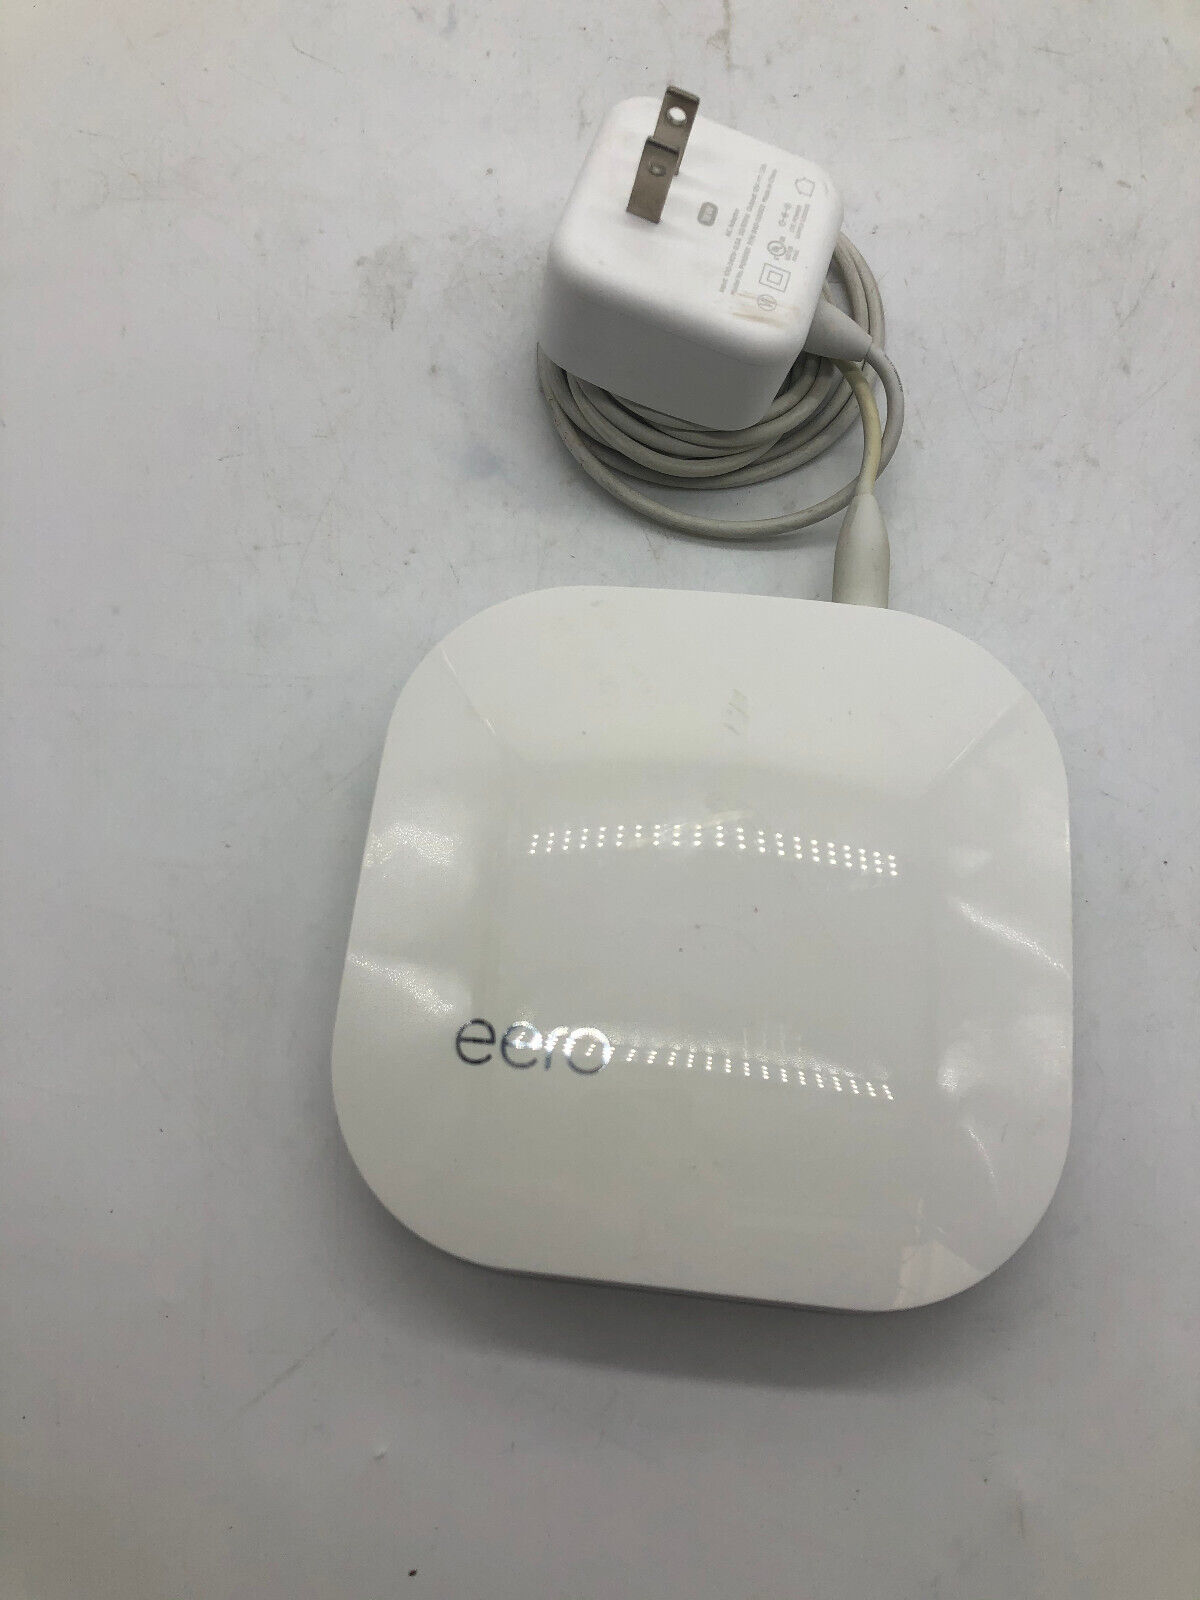 Eero A010001 1st Generation Mesh WiFi Router